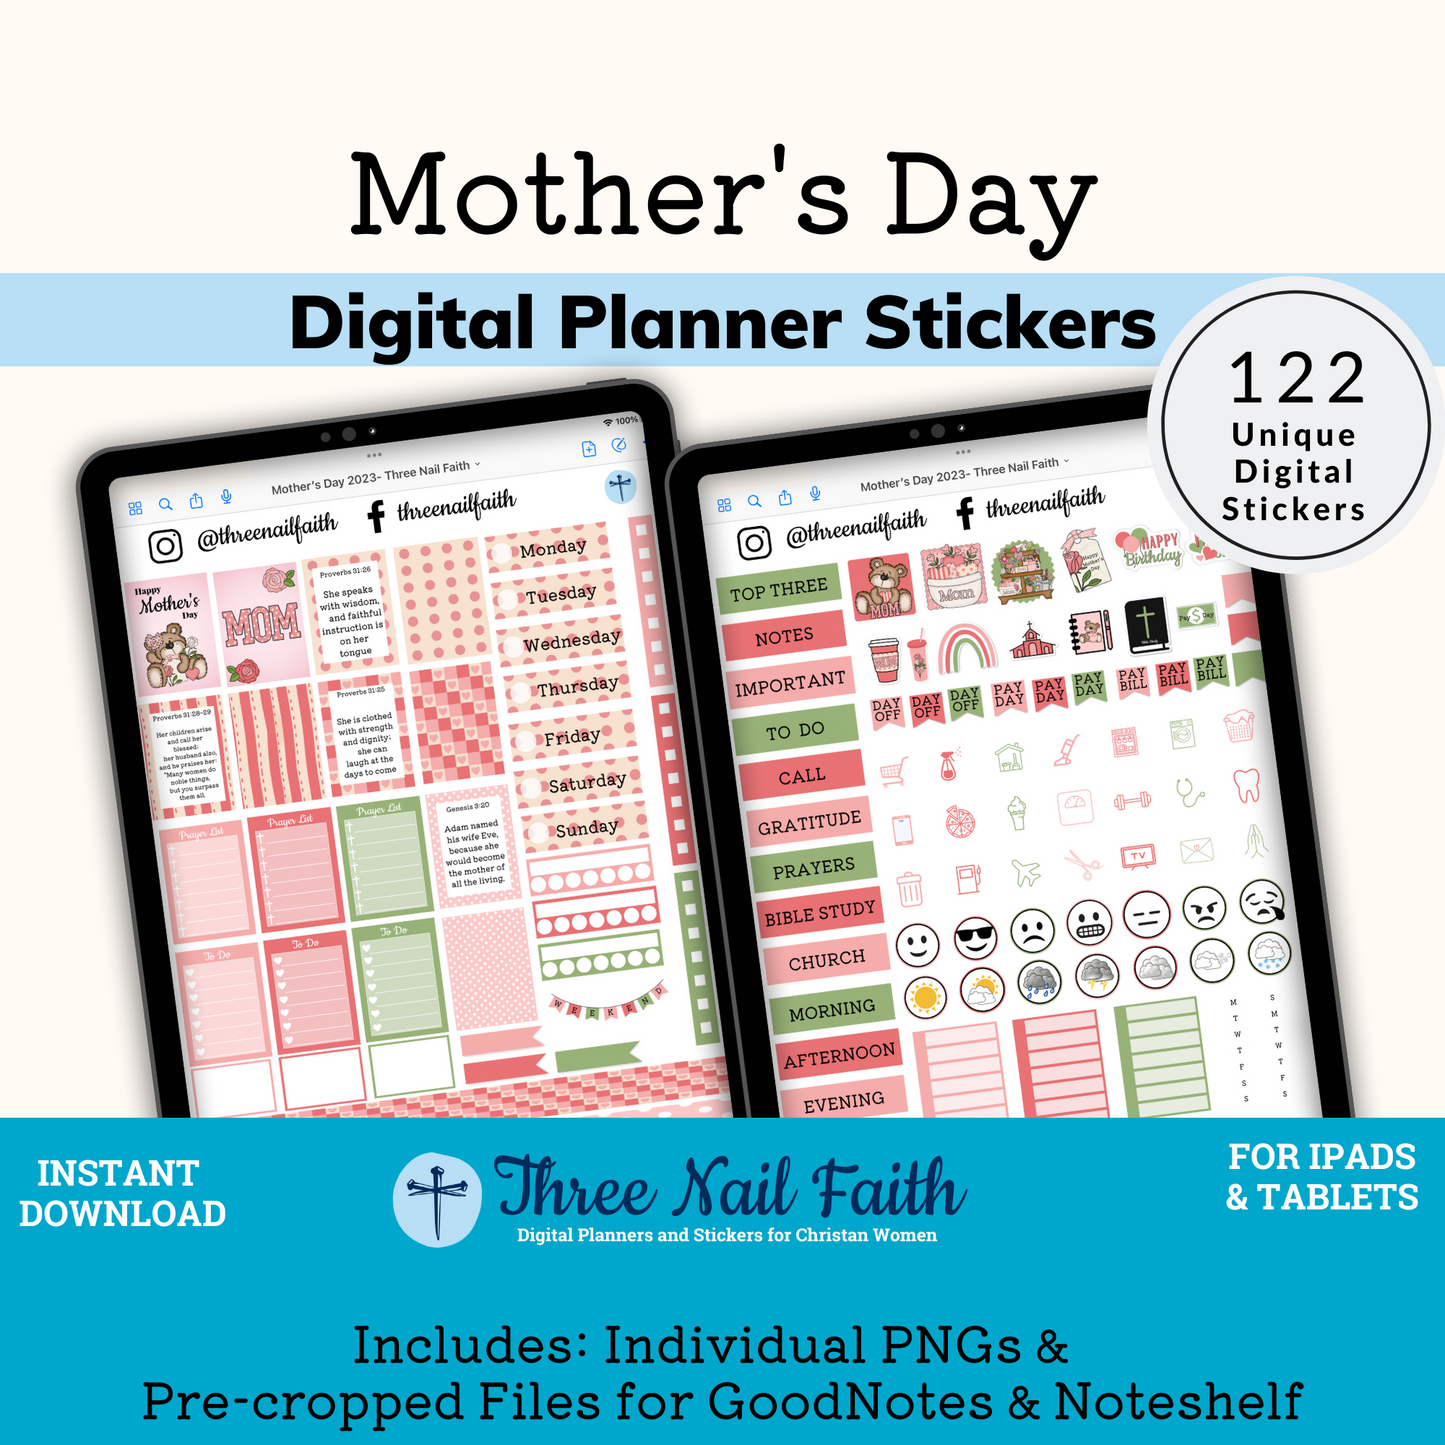 Mothers day digital sticker kit with 122 Digital stickers